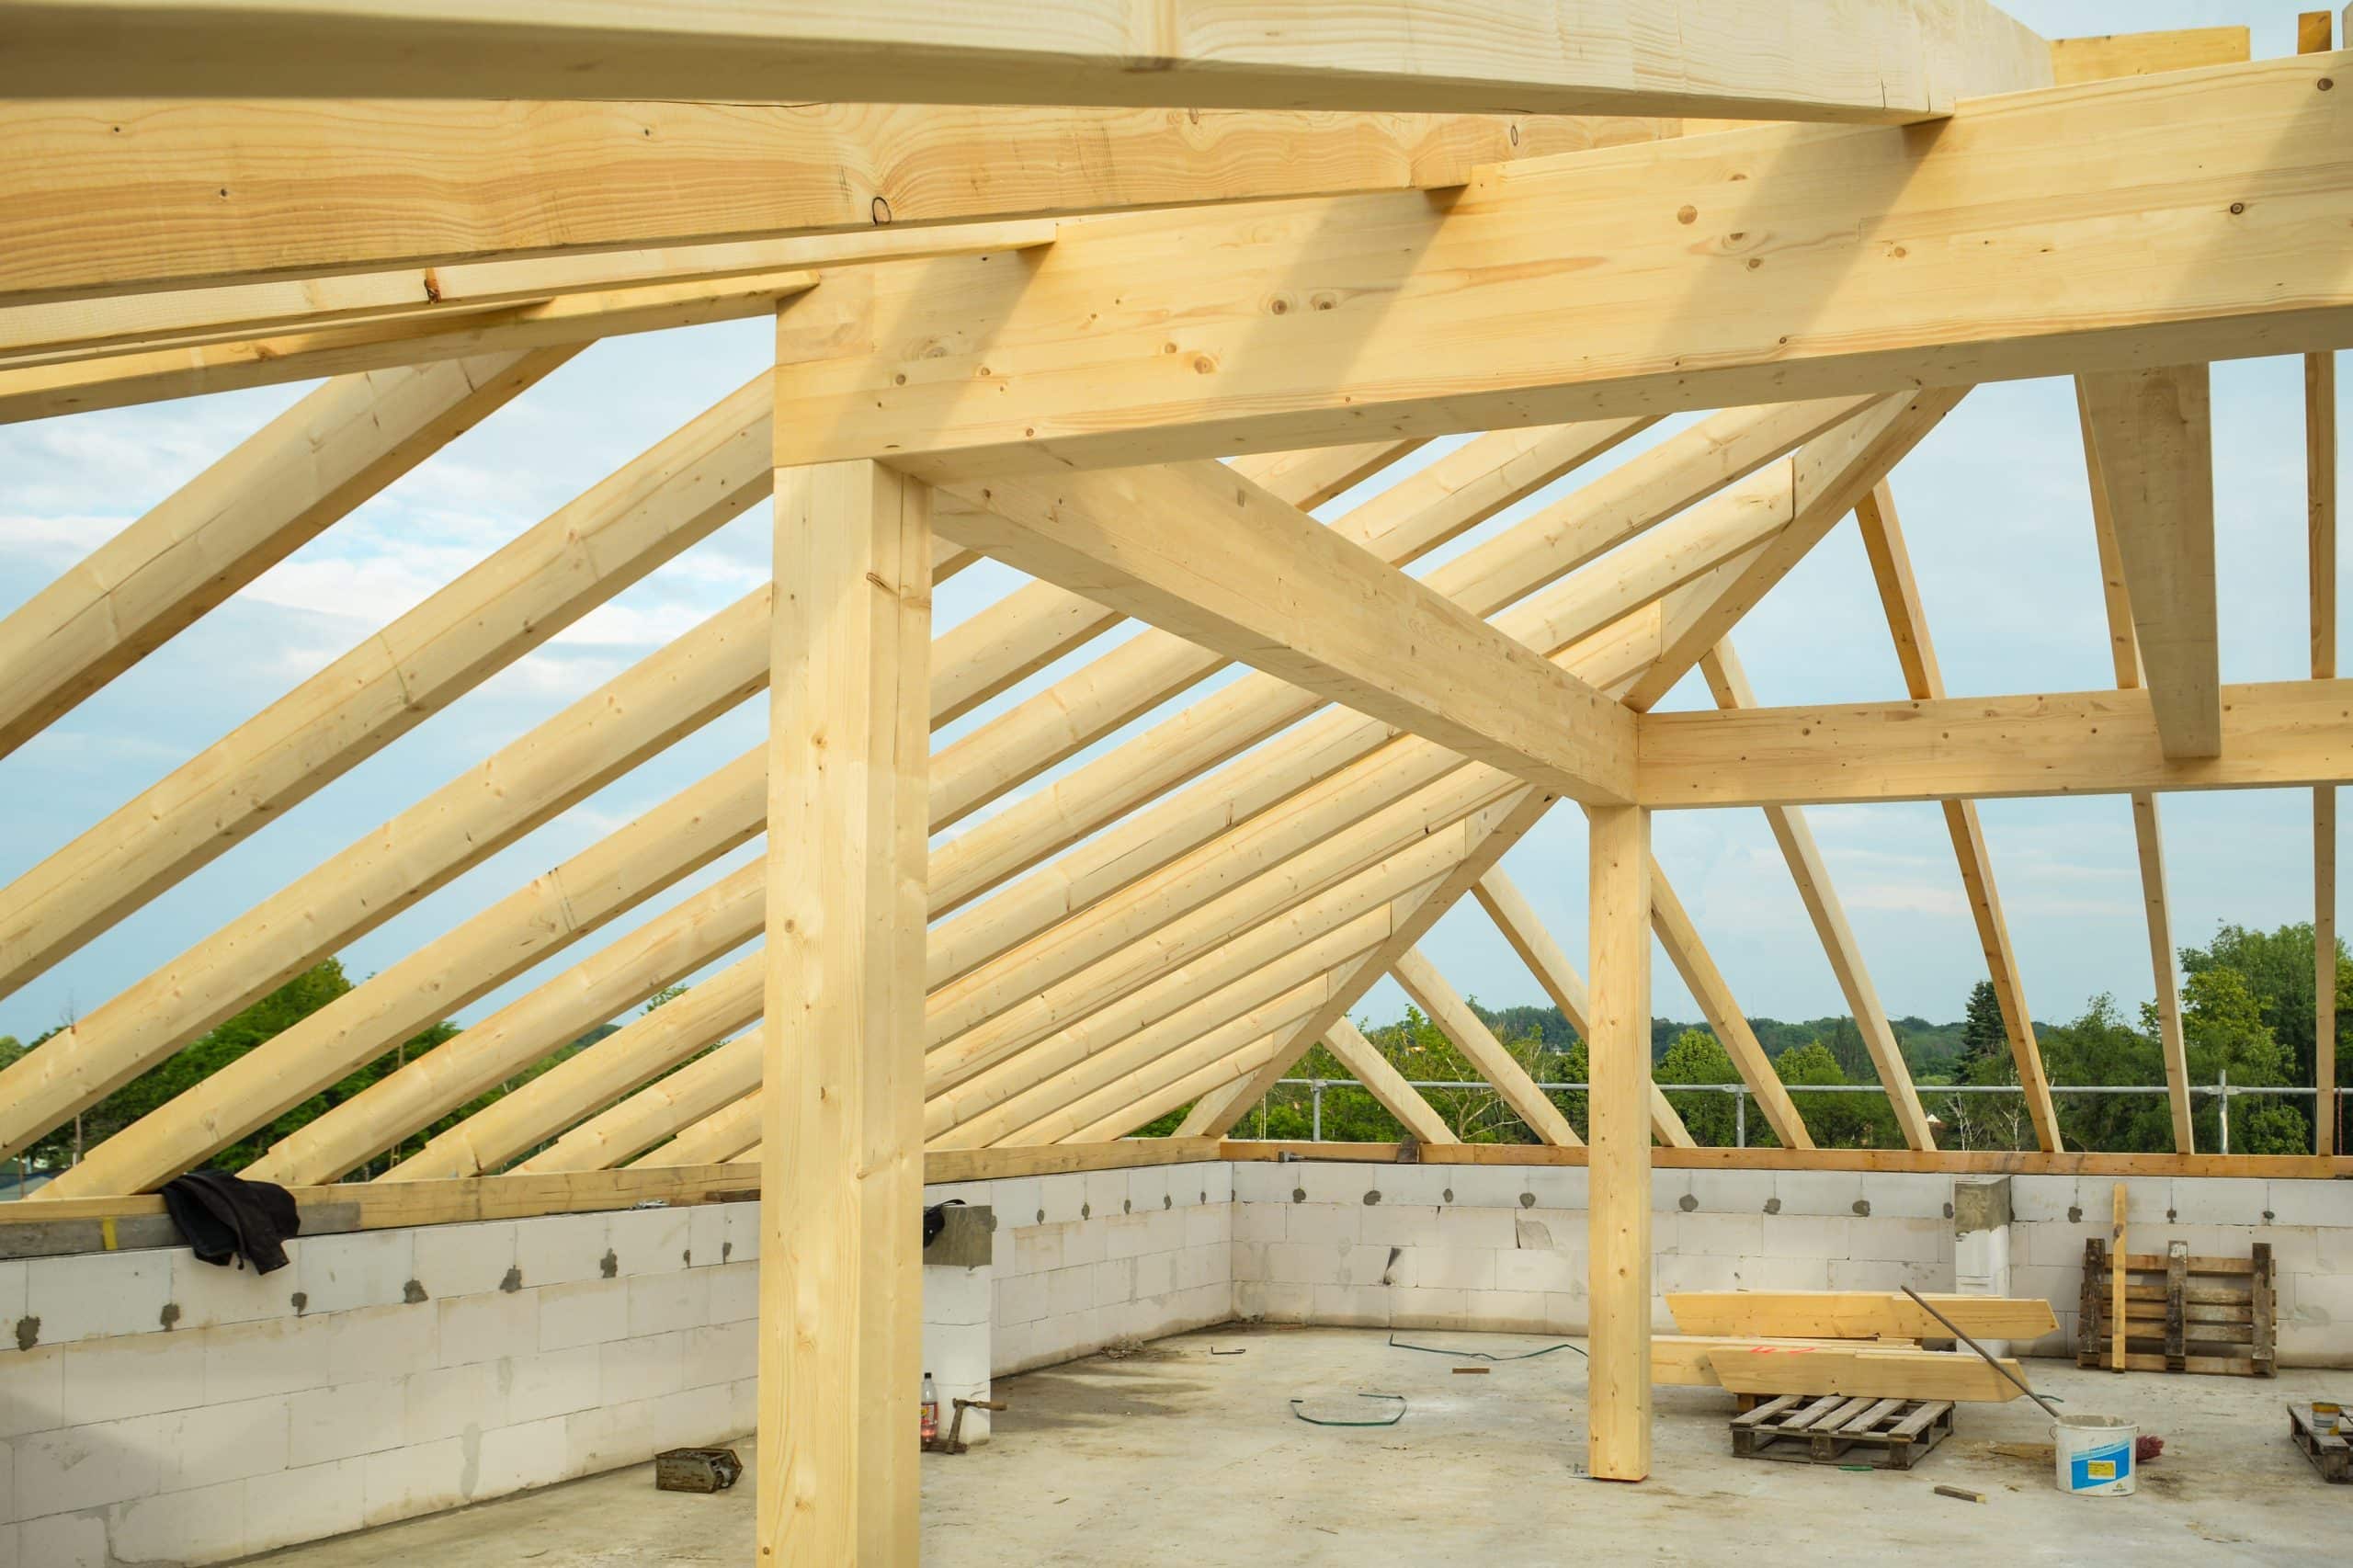 Trusses vs. Rafters: What’s Best for Your Garage?